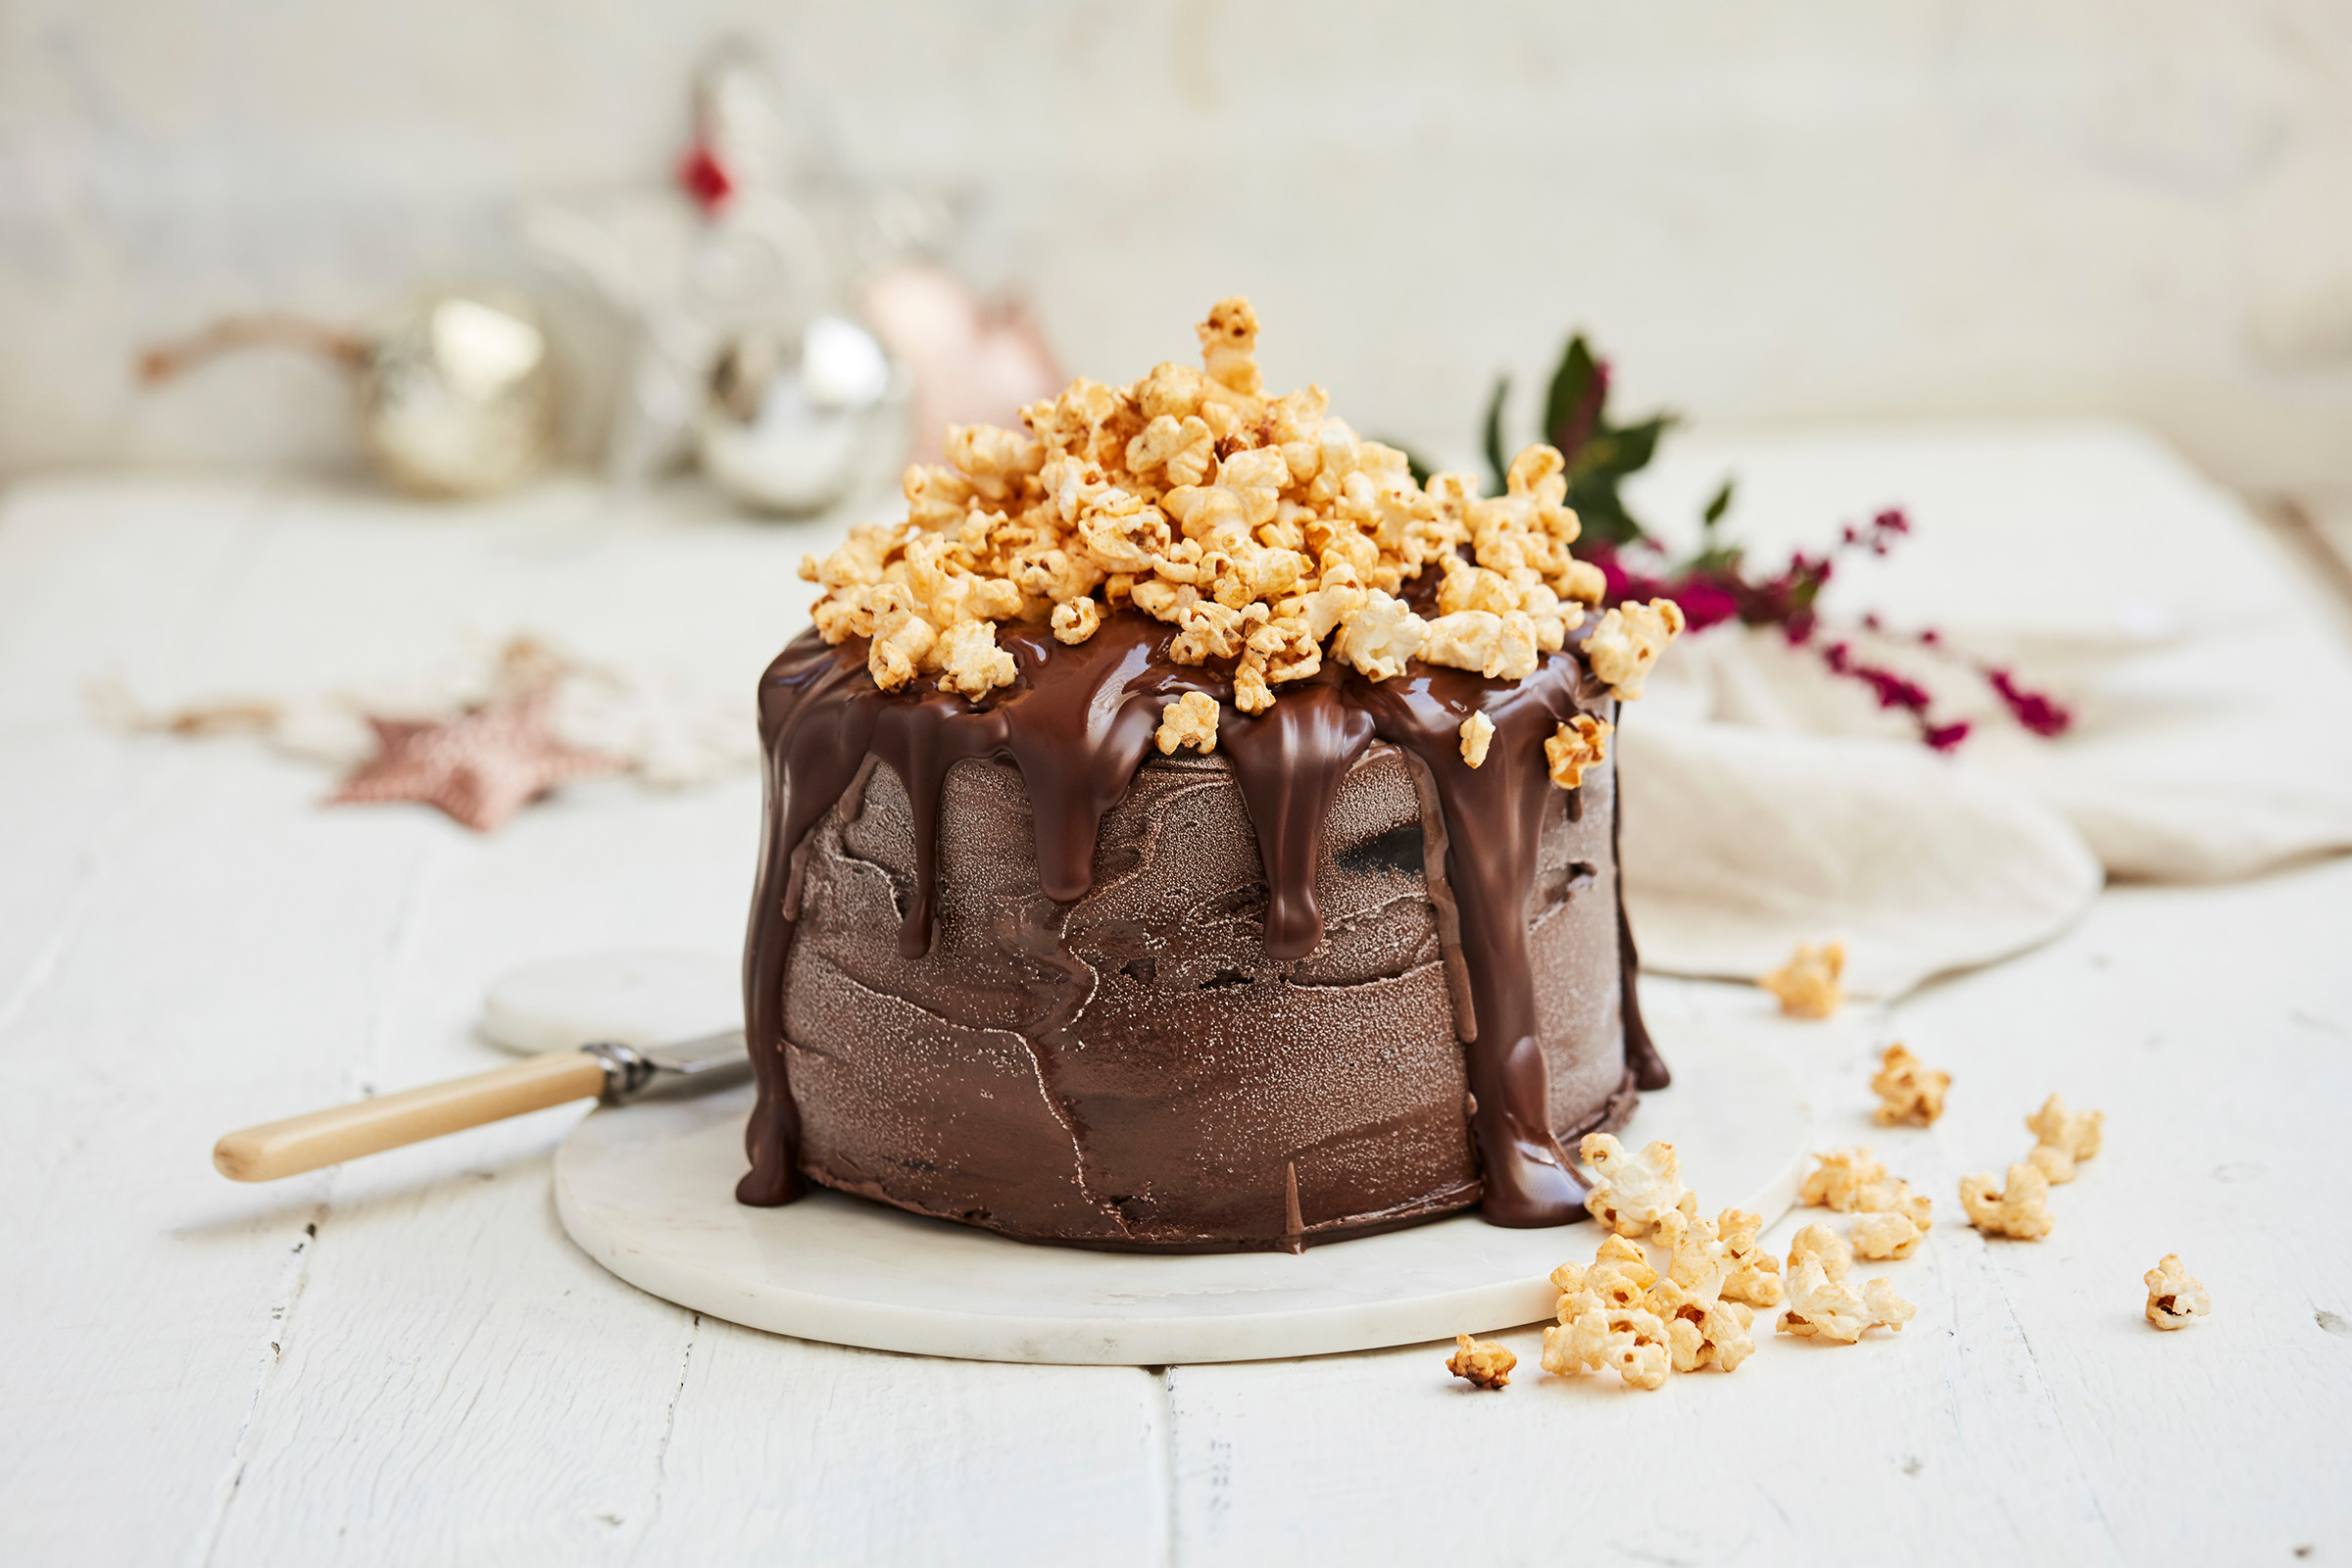 Advertising location photography for IGA of a chocolate cake dripping in chocolate icing covered in popcorn